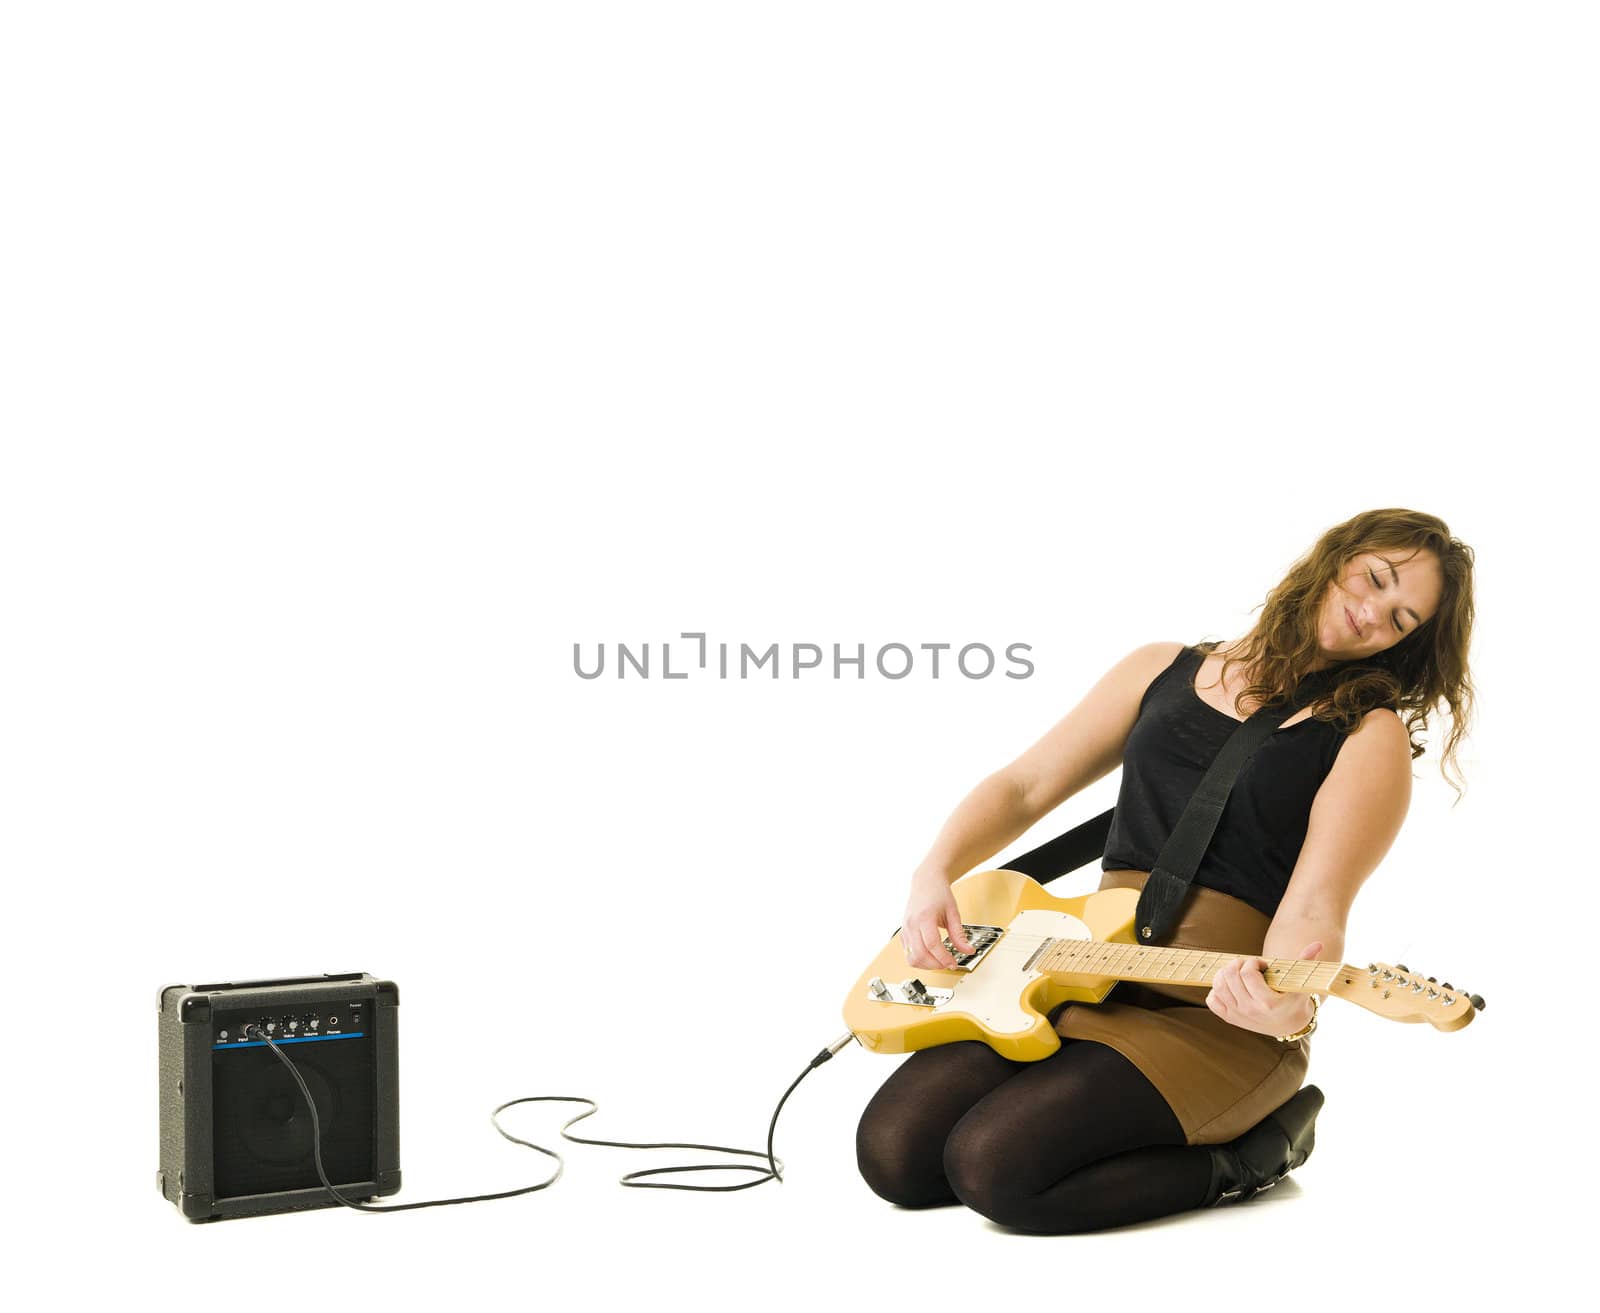 Young woman playing electric guitar isolated on white background